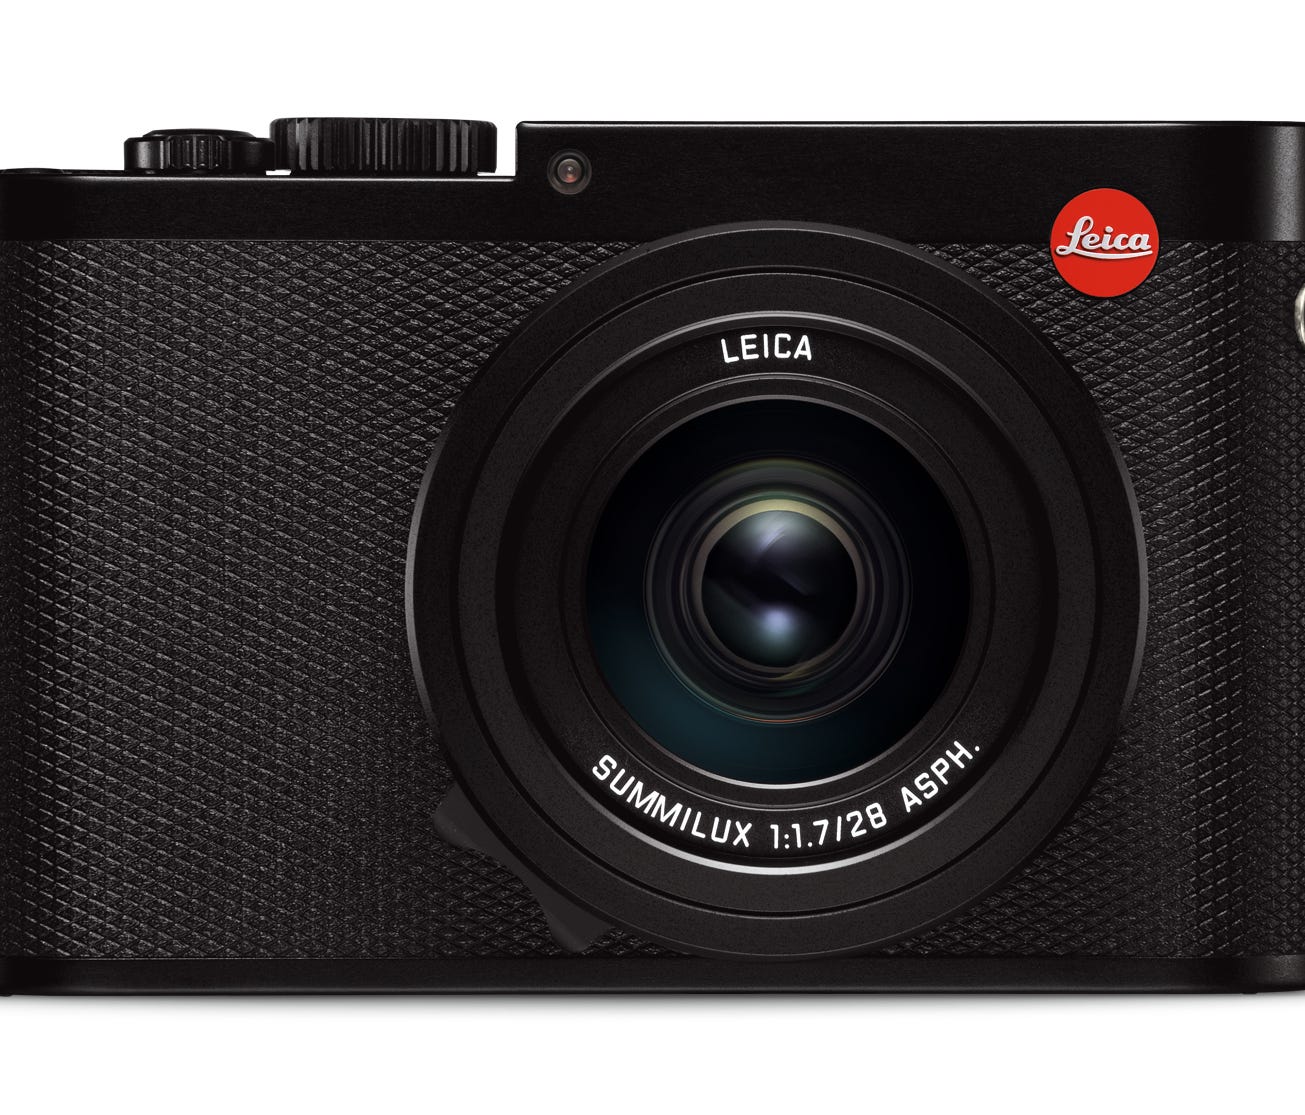 The Leica Q is a $4,250 alternative to the iPhone's 28mm view of the world. And, crazy as it sounds, worth it.